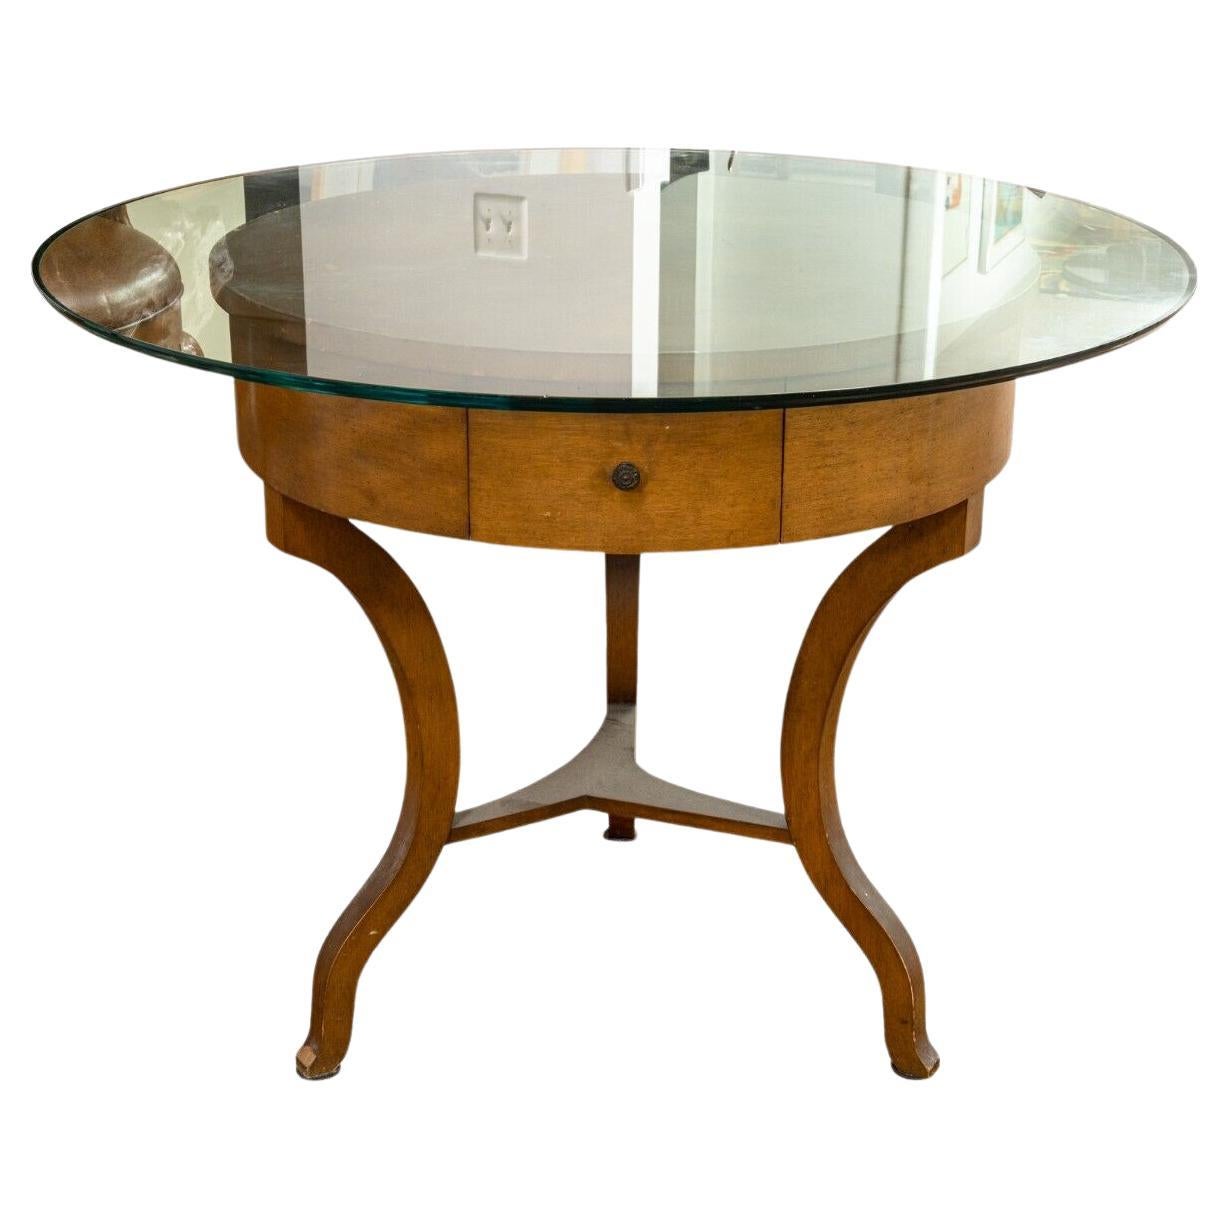 Vintage Cassard Chateau Original Wood and Glass Round Dintette Table